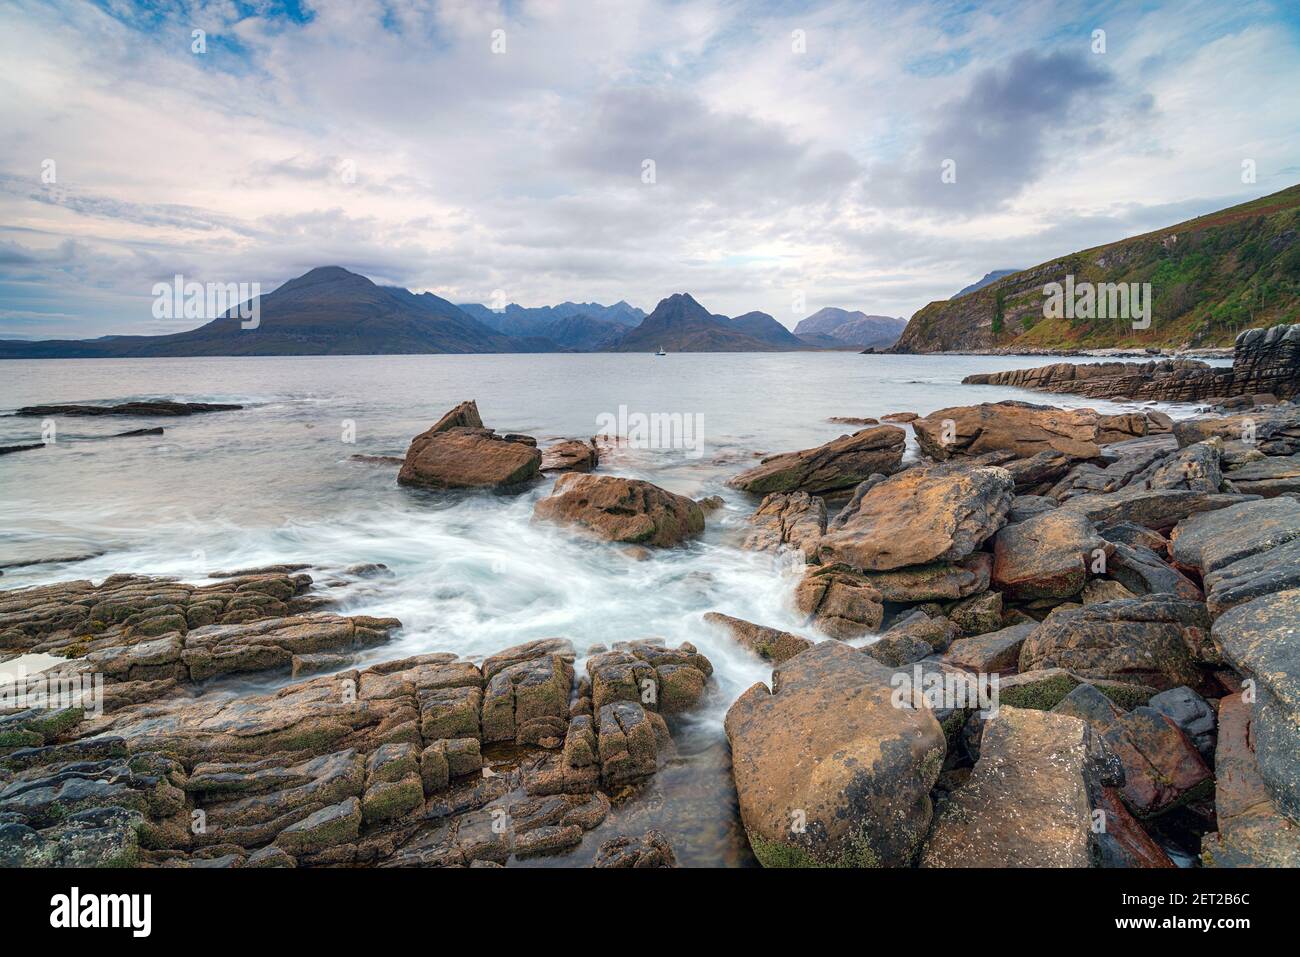 The rocky beach at Elgol on the Isle of Skye in Scotland Stock Photo